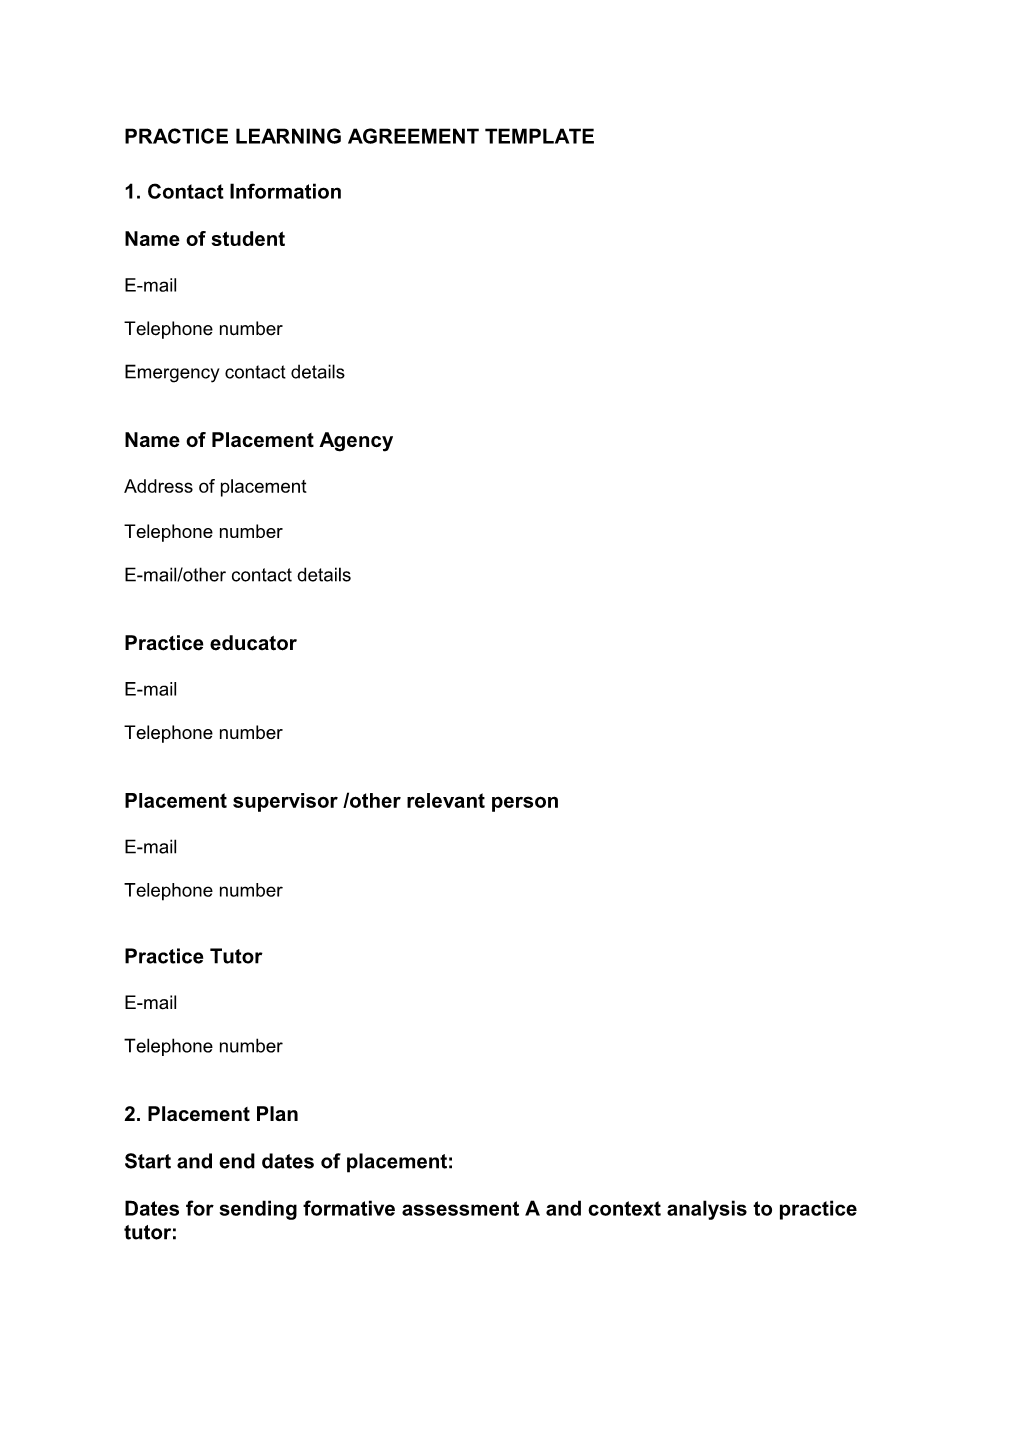 Practice Learning Agreement Template